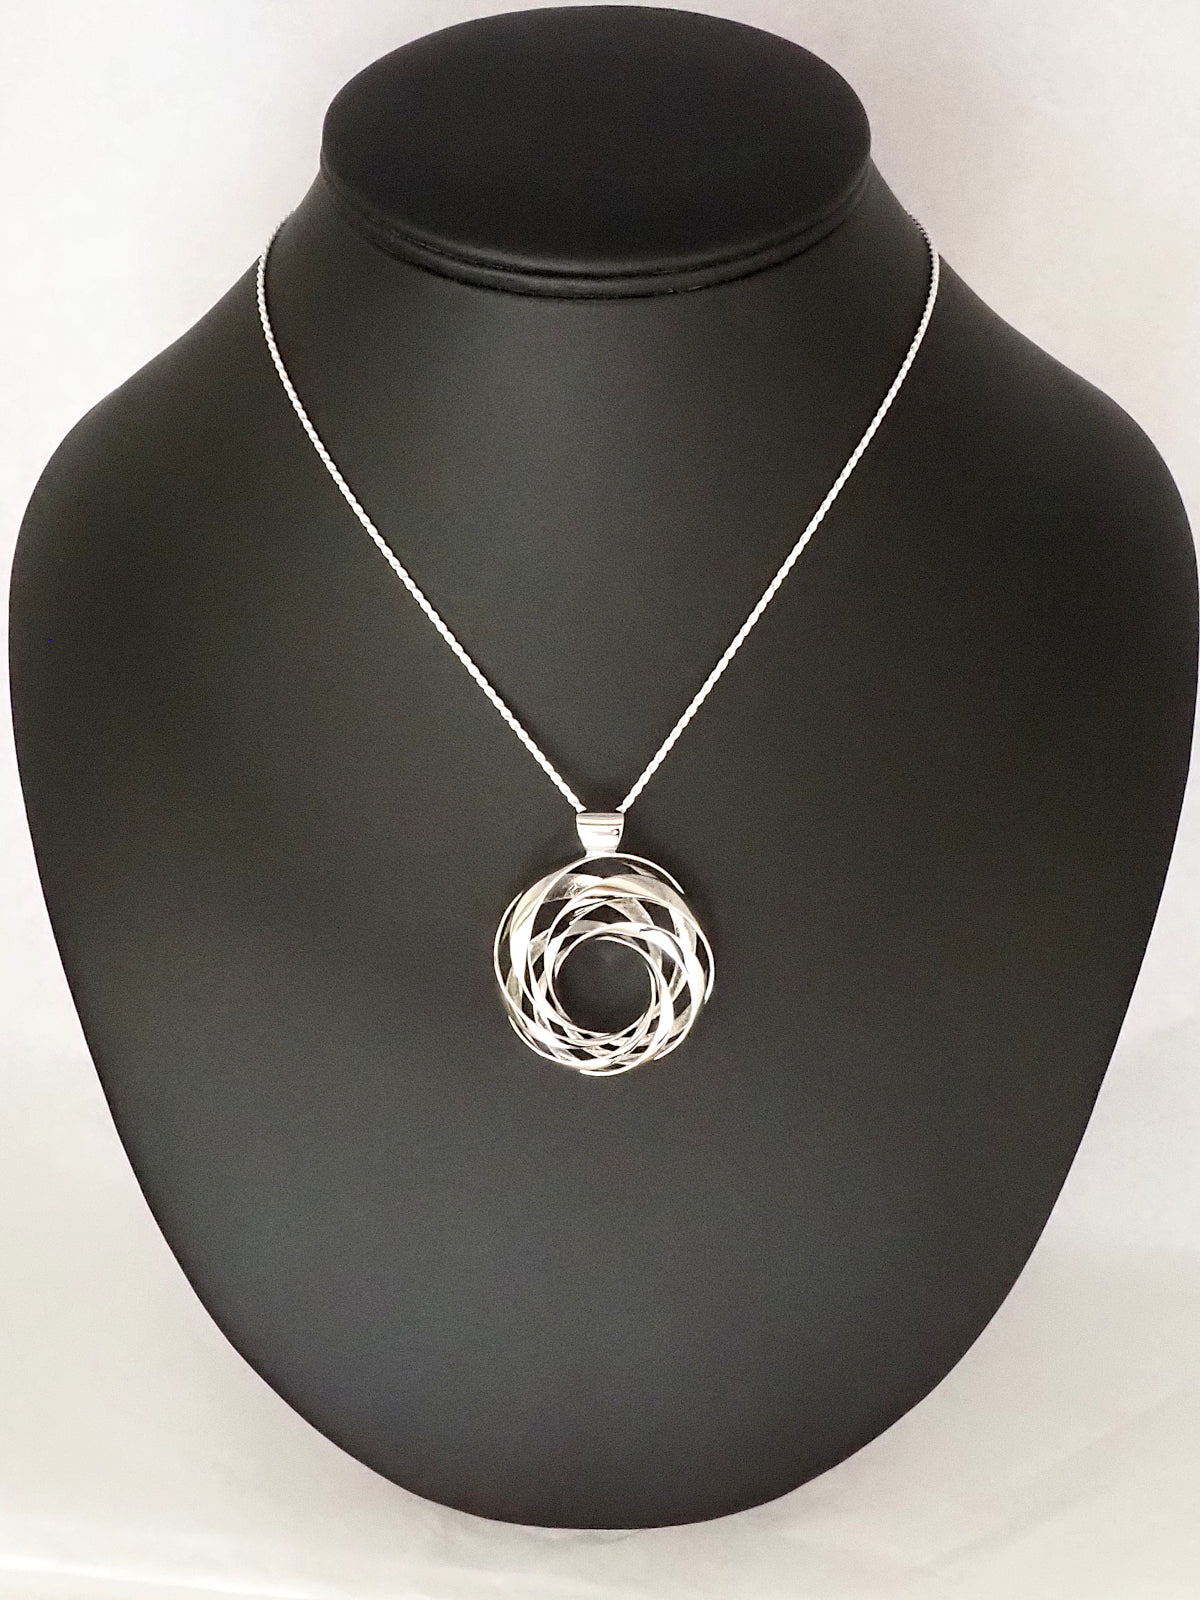 A 35mm rhodium-plated brass cyclide pendant with a silver French rope chain on a necklace display.